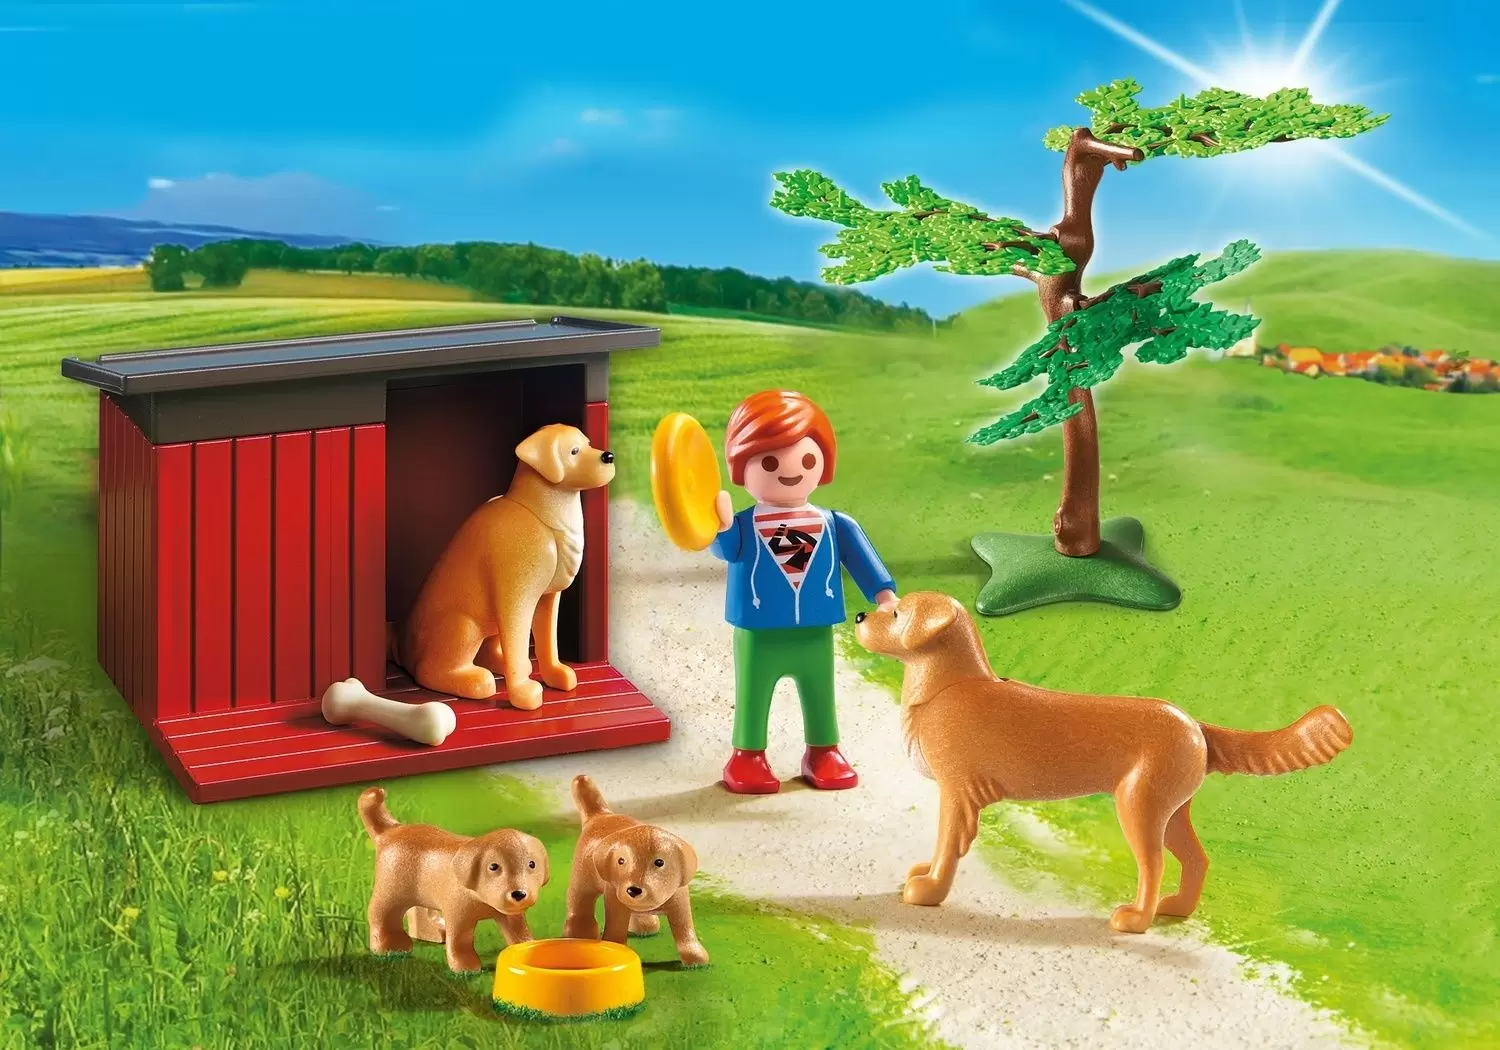 Playmobil Farmers - Golden Retrievers with Toy